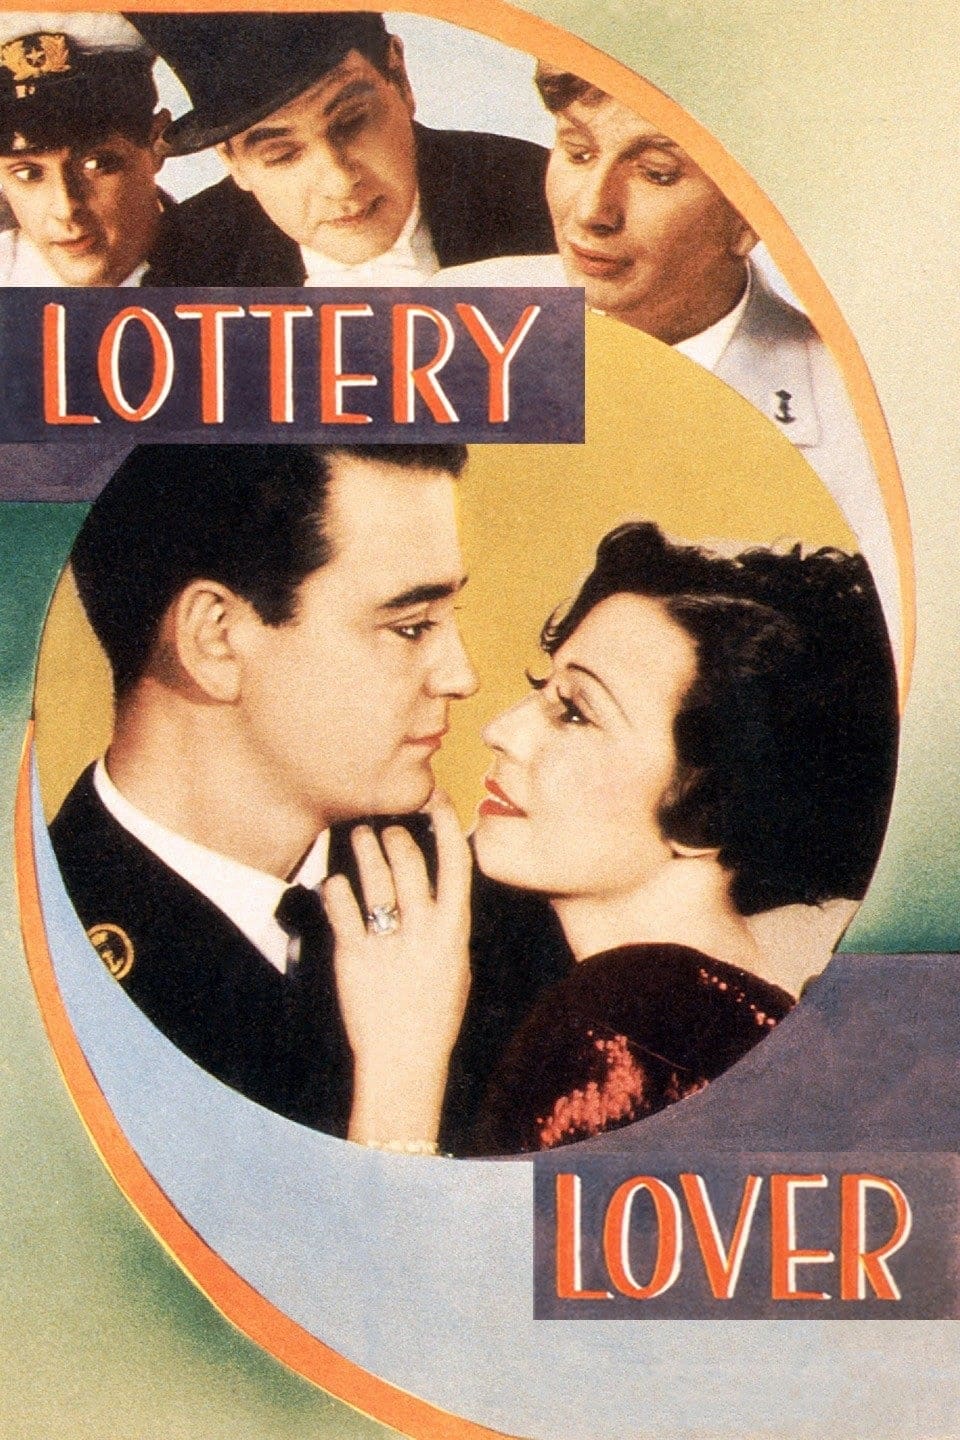 The Lottery Lover (1935)